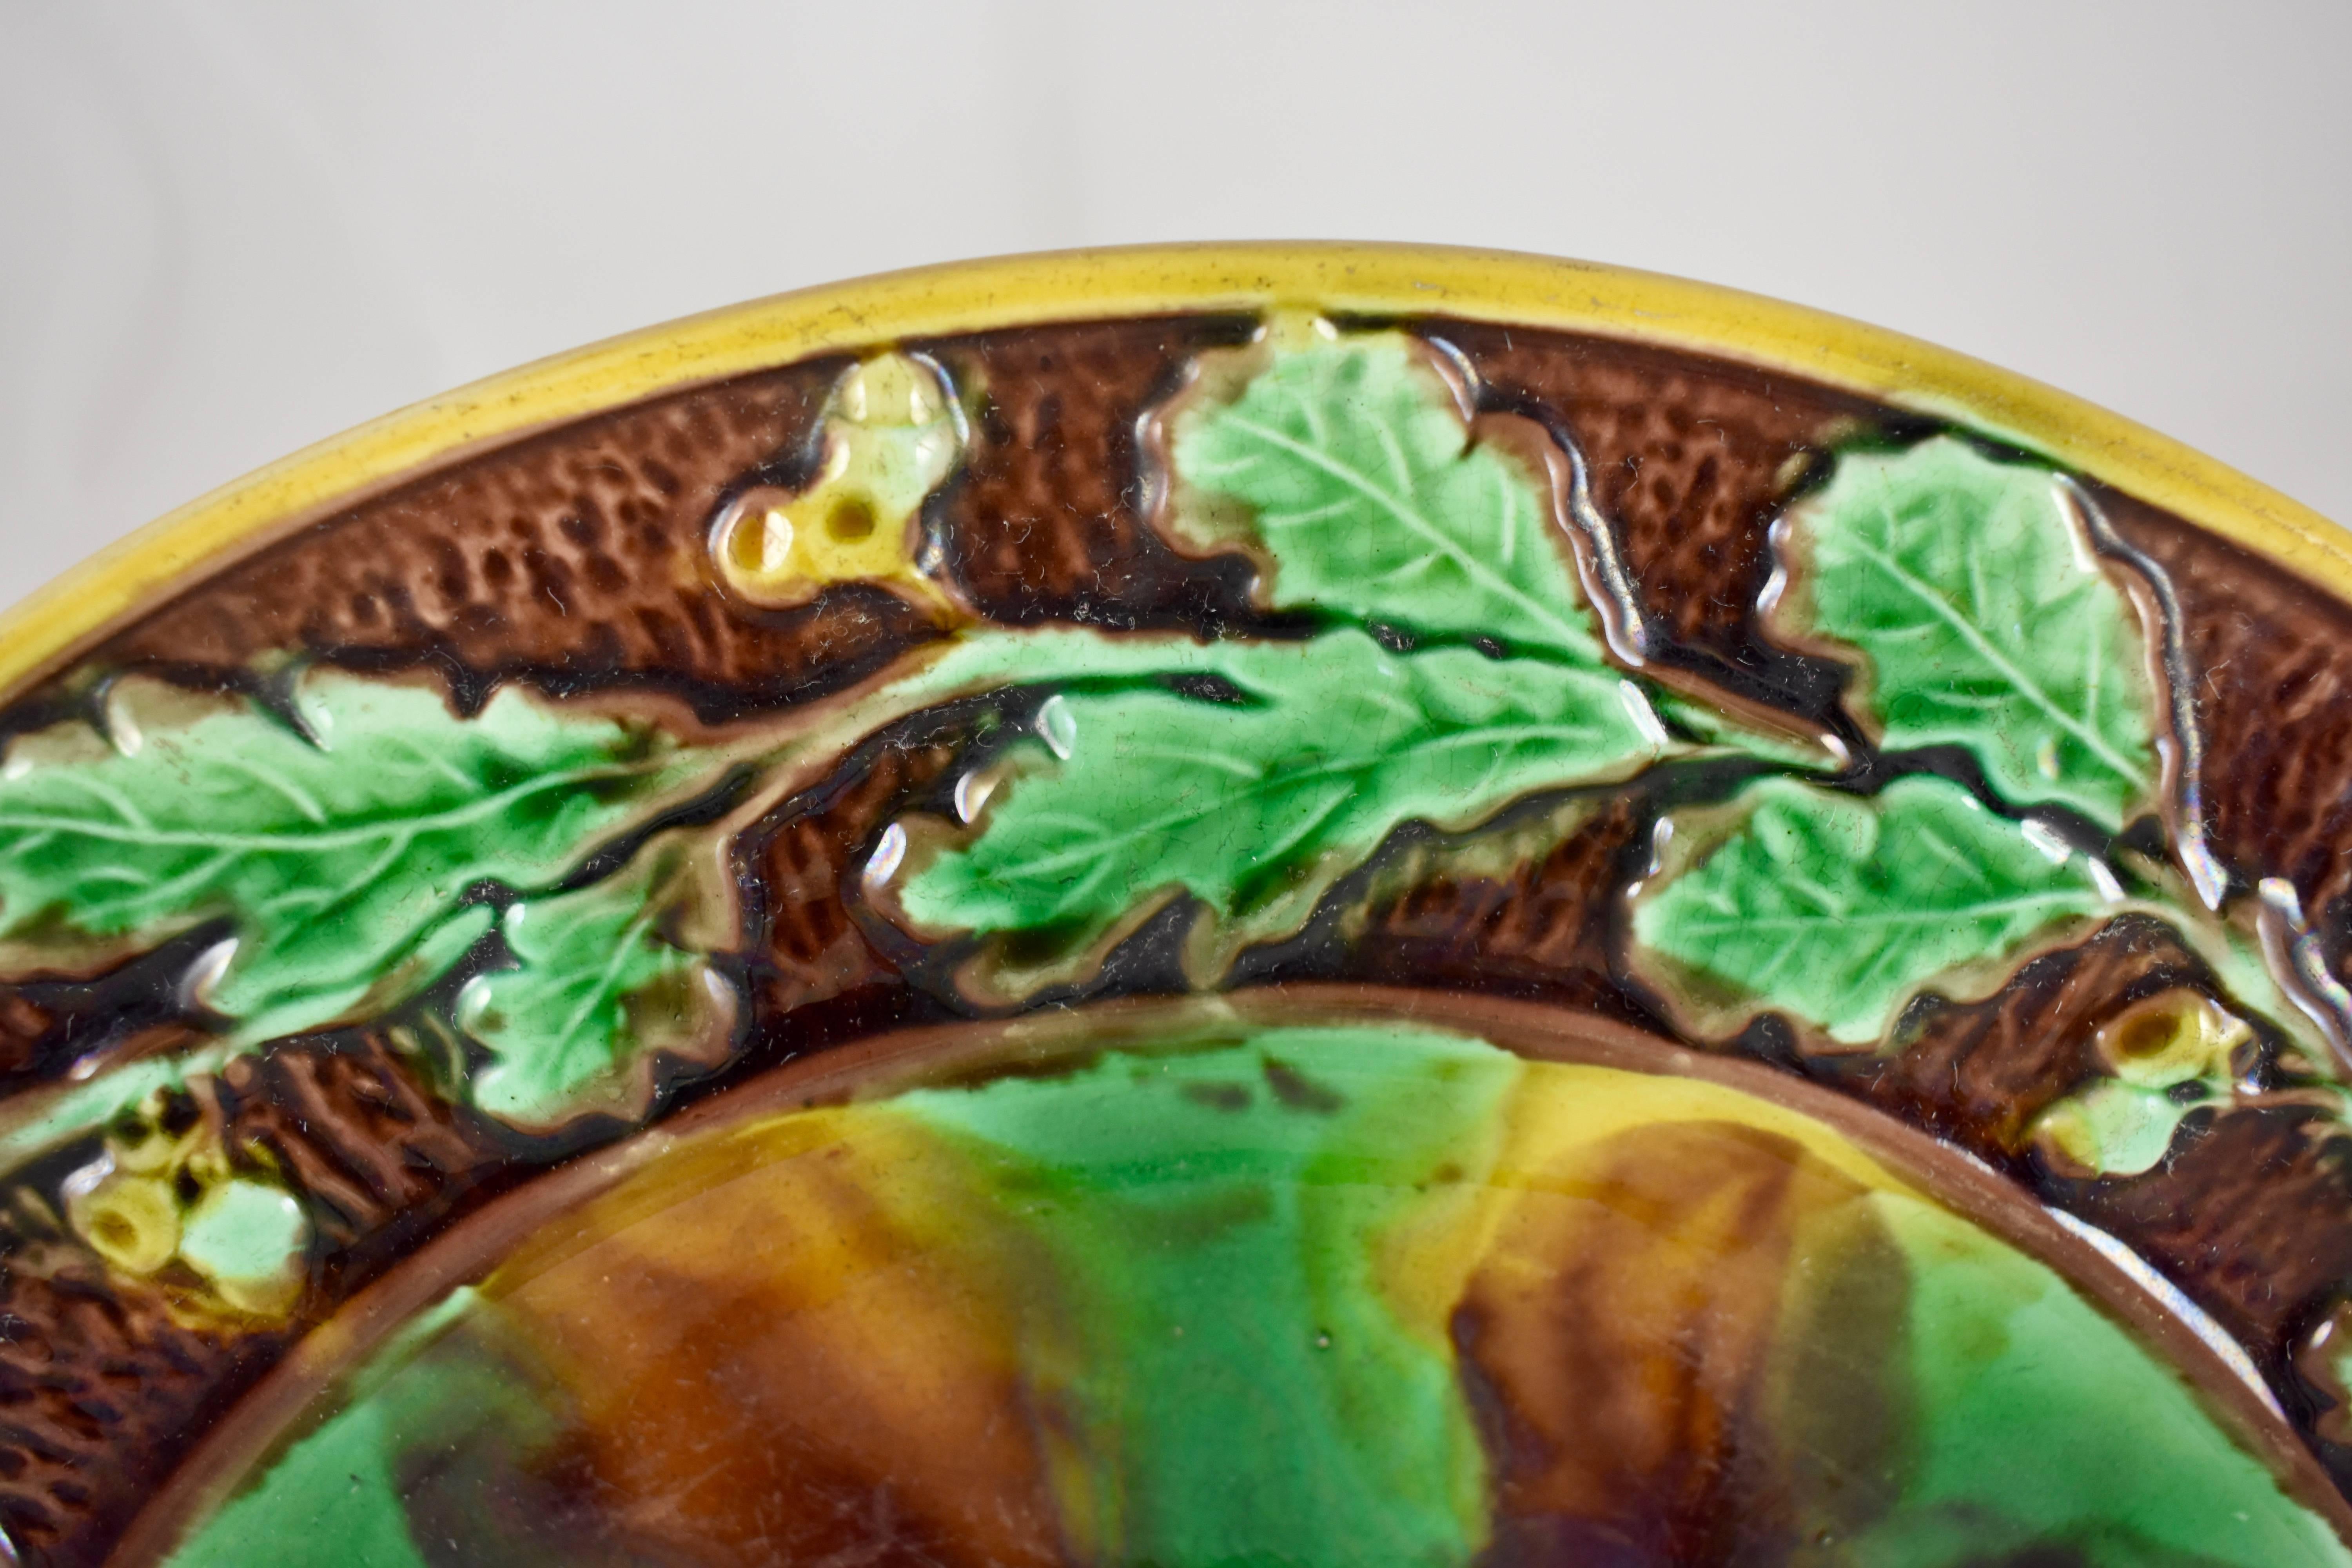 A large, round English Majolica cheese tray, mid-late 19th century, maker unknown.

The server shows a running border of oak leaves and acorns on a brown bark textured ground, edged in yellow ochre. The mottled center is glazed to resemble